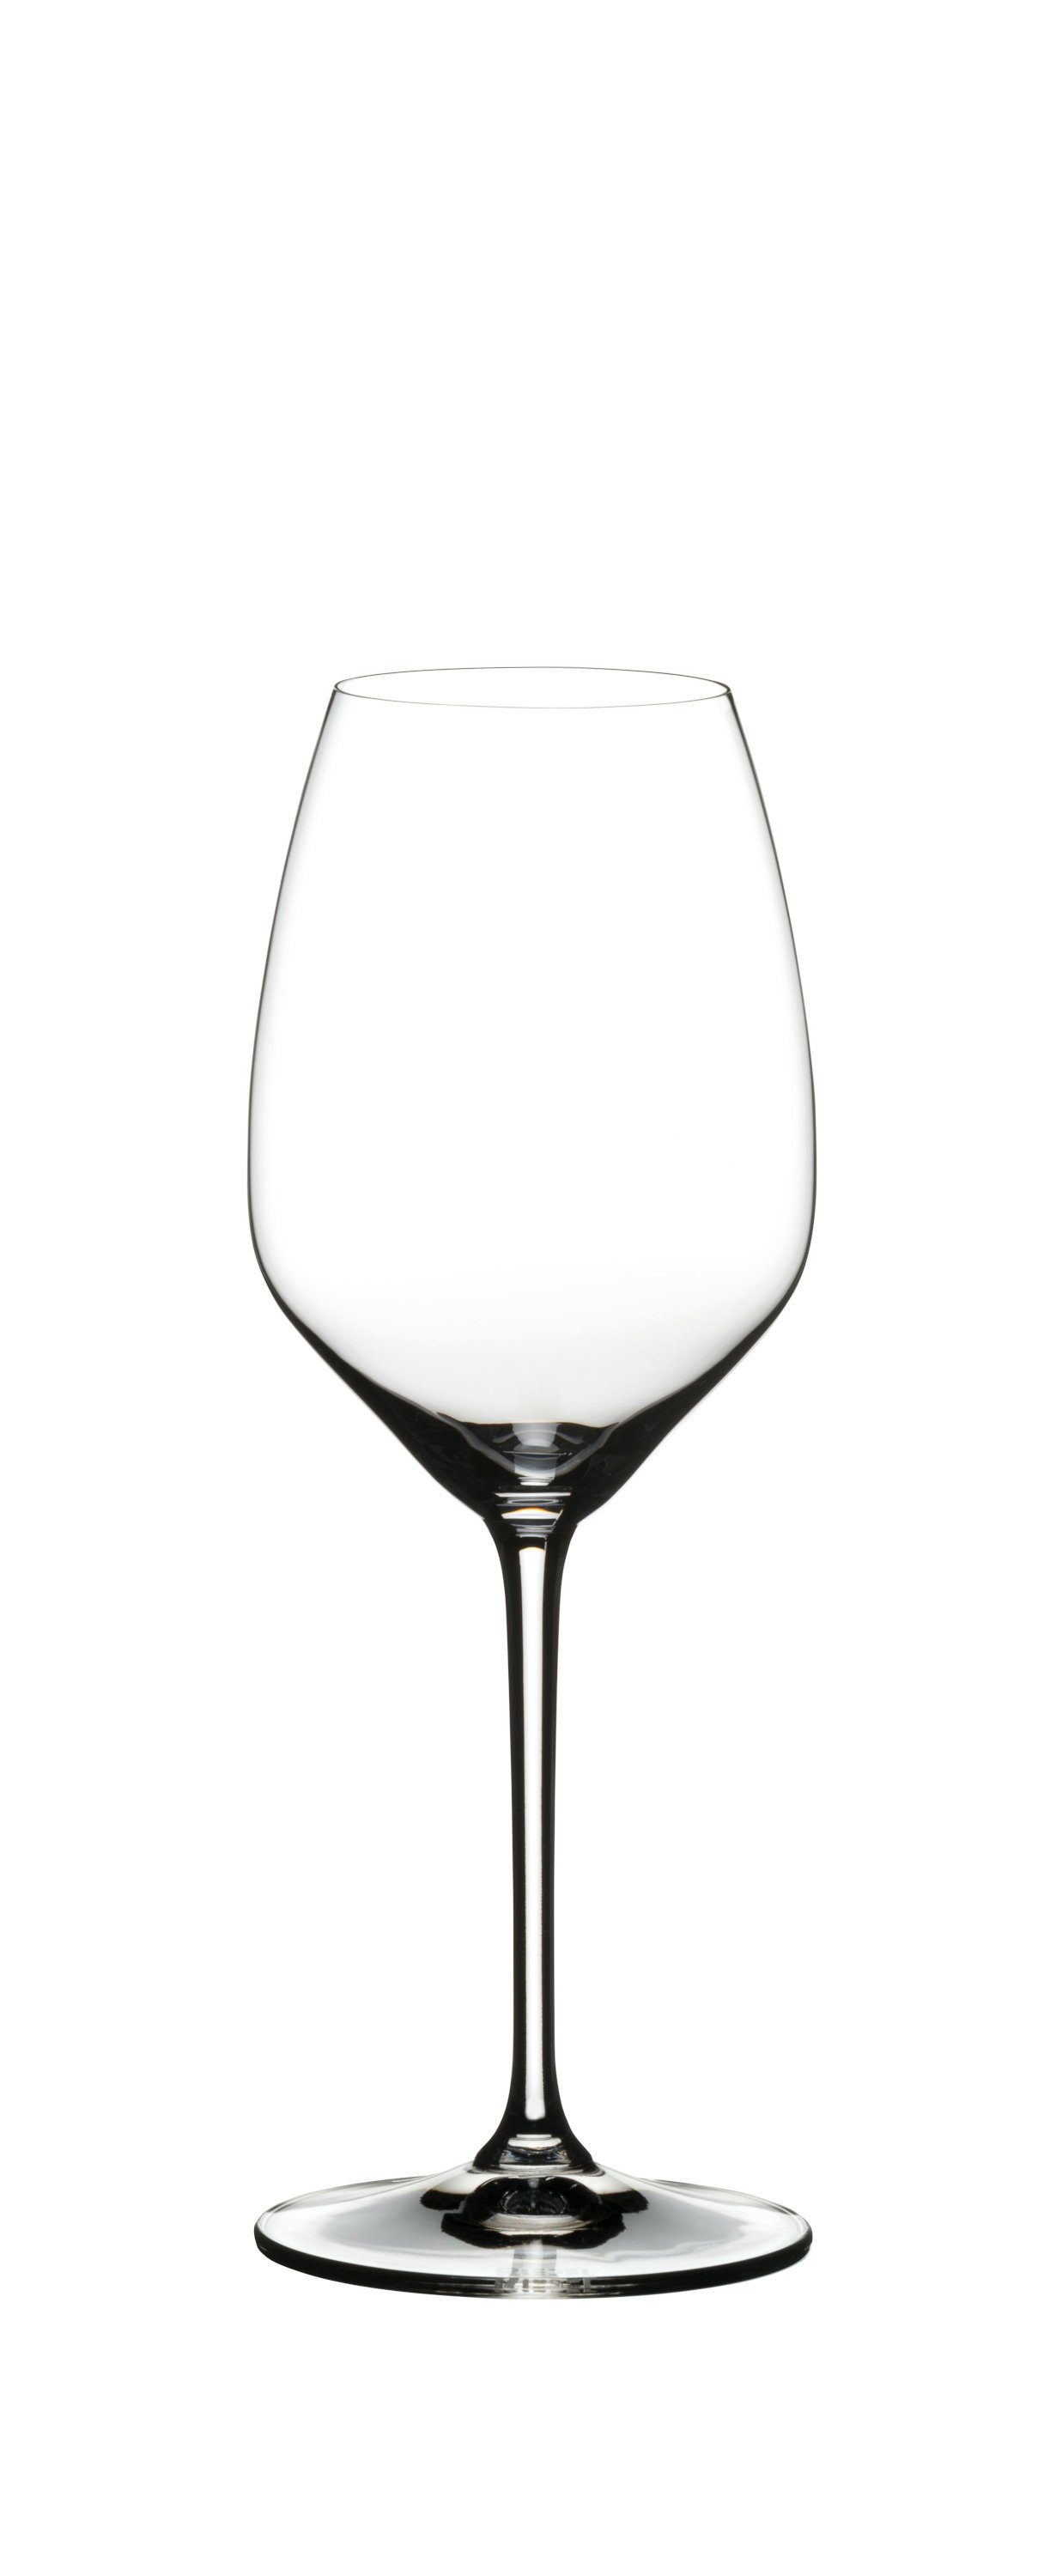 RIEDEL THE WINE GLASS COMPANY Weißweinglas Riedel Heart to Heart Riesling 2 Stck 6409/05, Glas